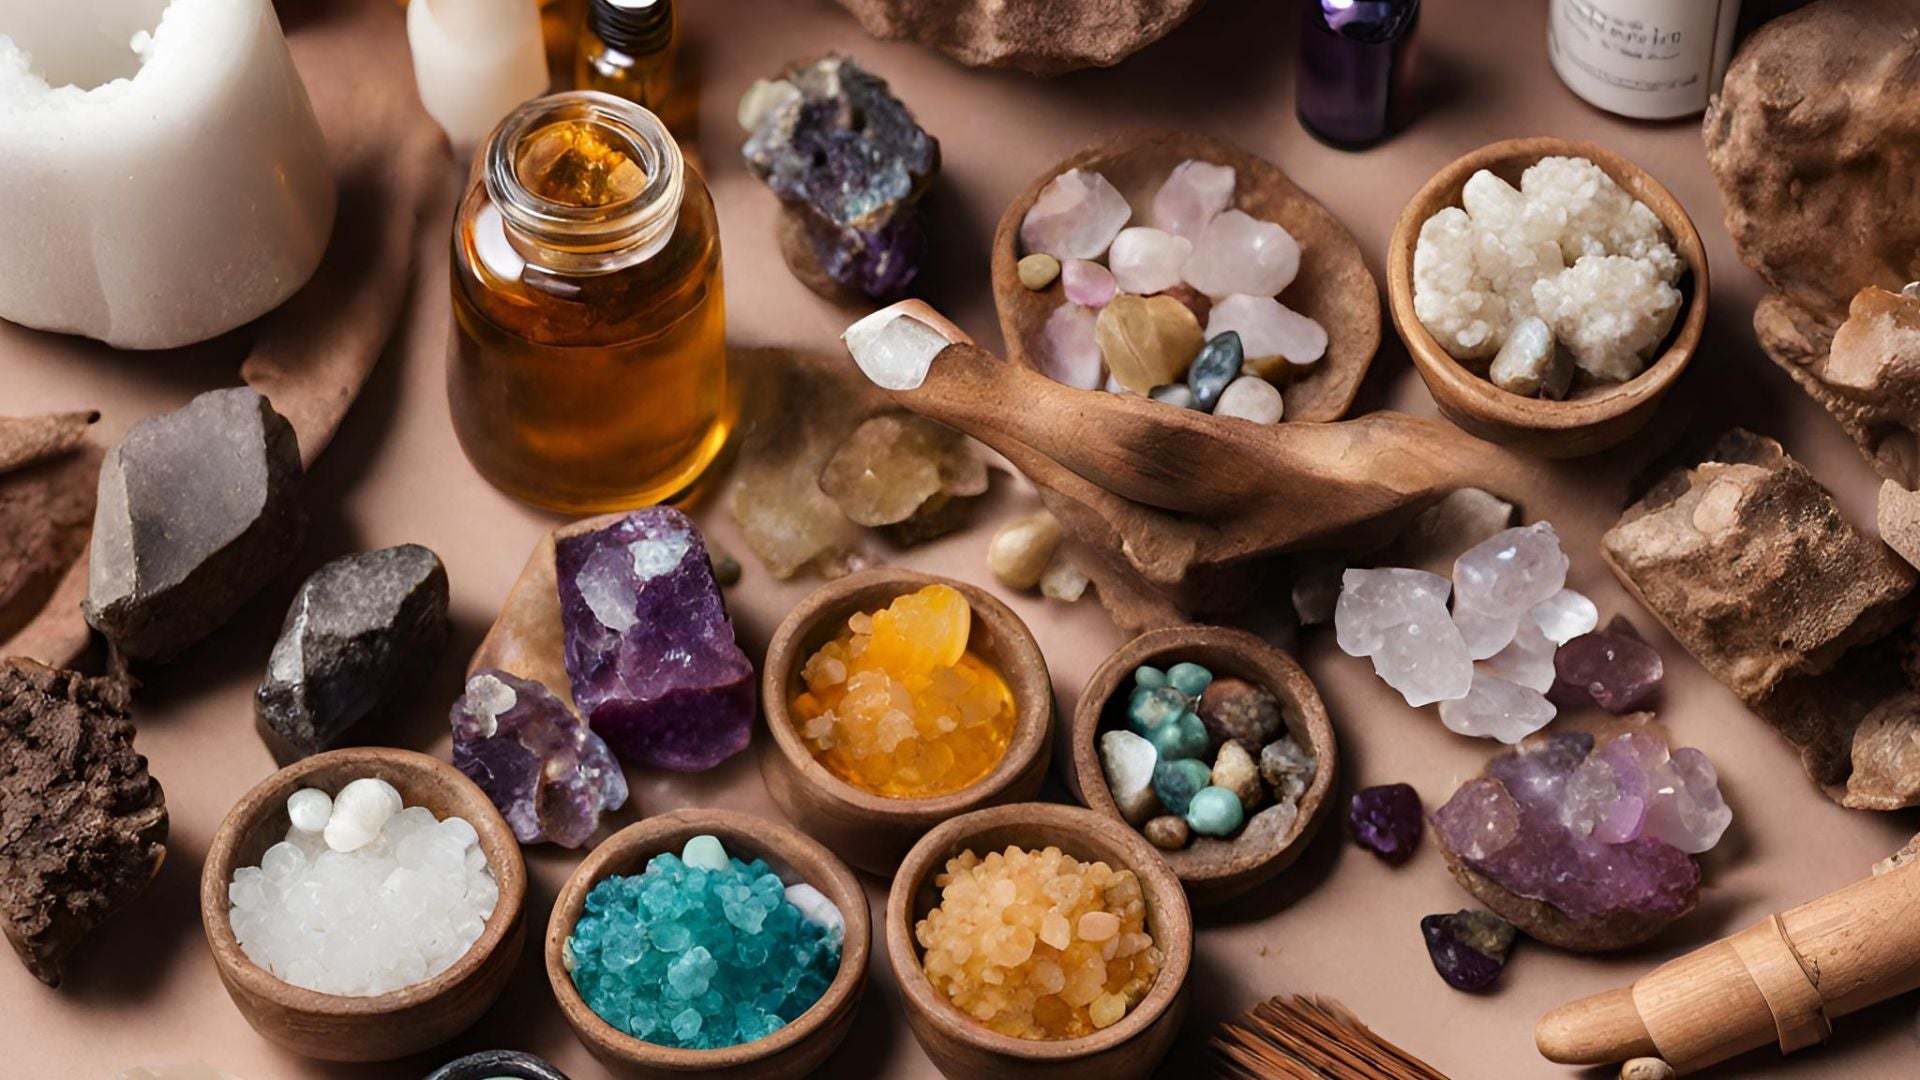 Premium crystals and skincare essentials at Ancient Infusions - best picks for your well-being.